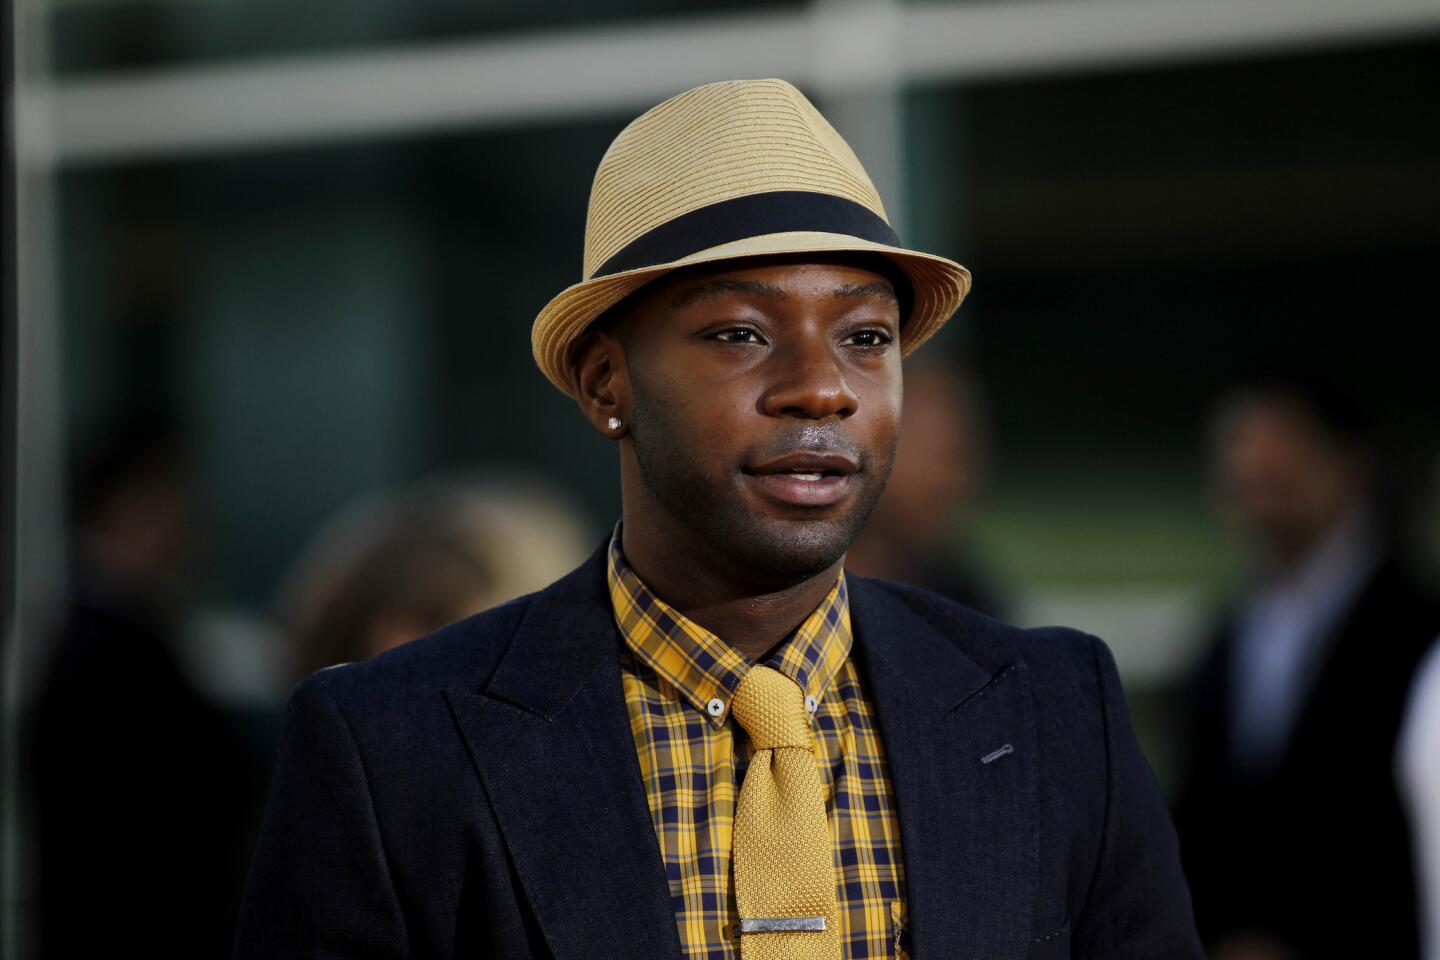 In this June 21, 2011 file photo, Nelsan Ellis arrives at the premiere for the fourth season of HBO's "True Blood" in Los Angeles. Ellis, a Harvey, Ill., native best known for playing the character of Lafayette Reynolds on "True Blood," died July 8, 2017, at the age of 39. Read more.